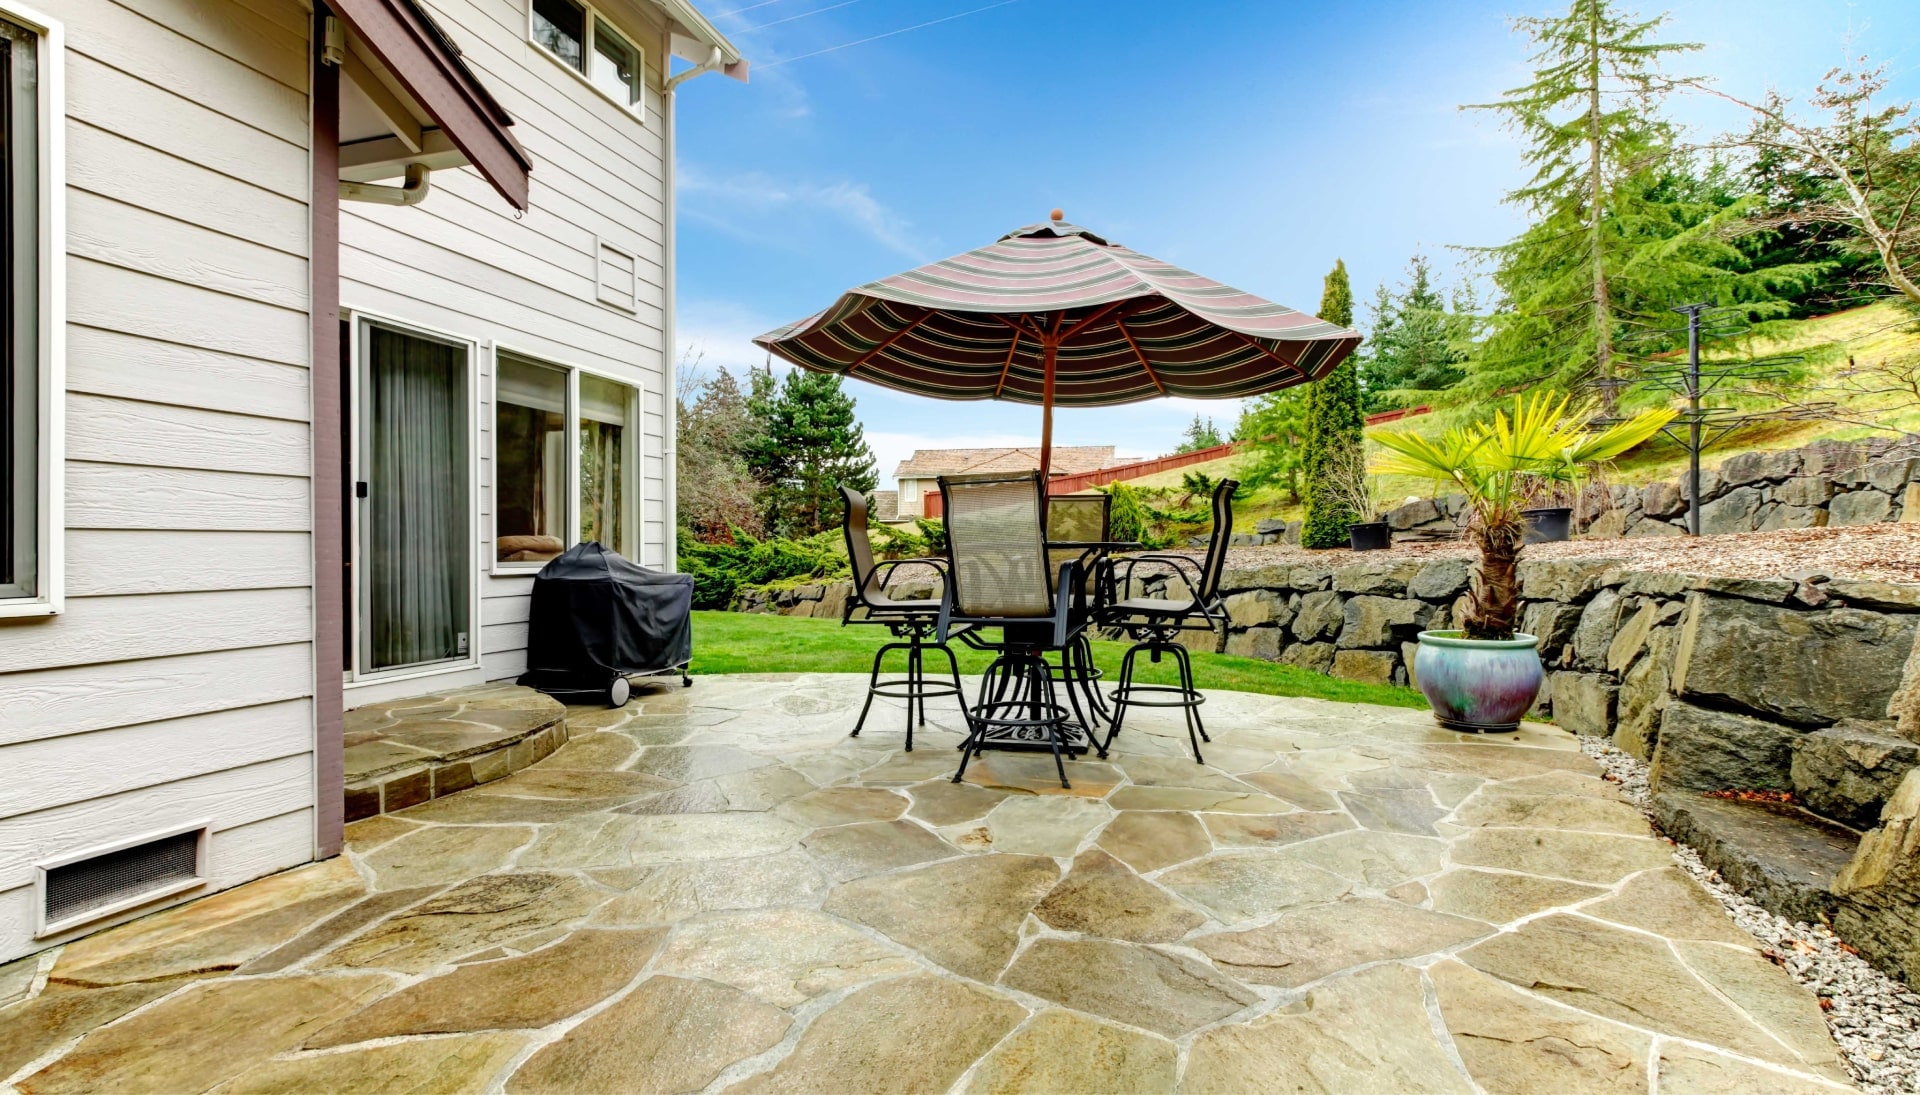 Beautifully Textured and Patterned Concrete Patios in Bend, OR